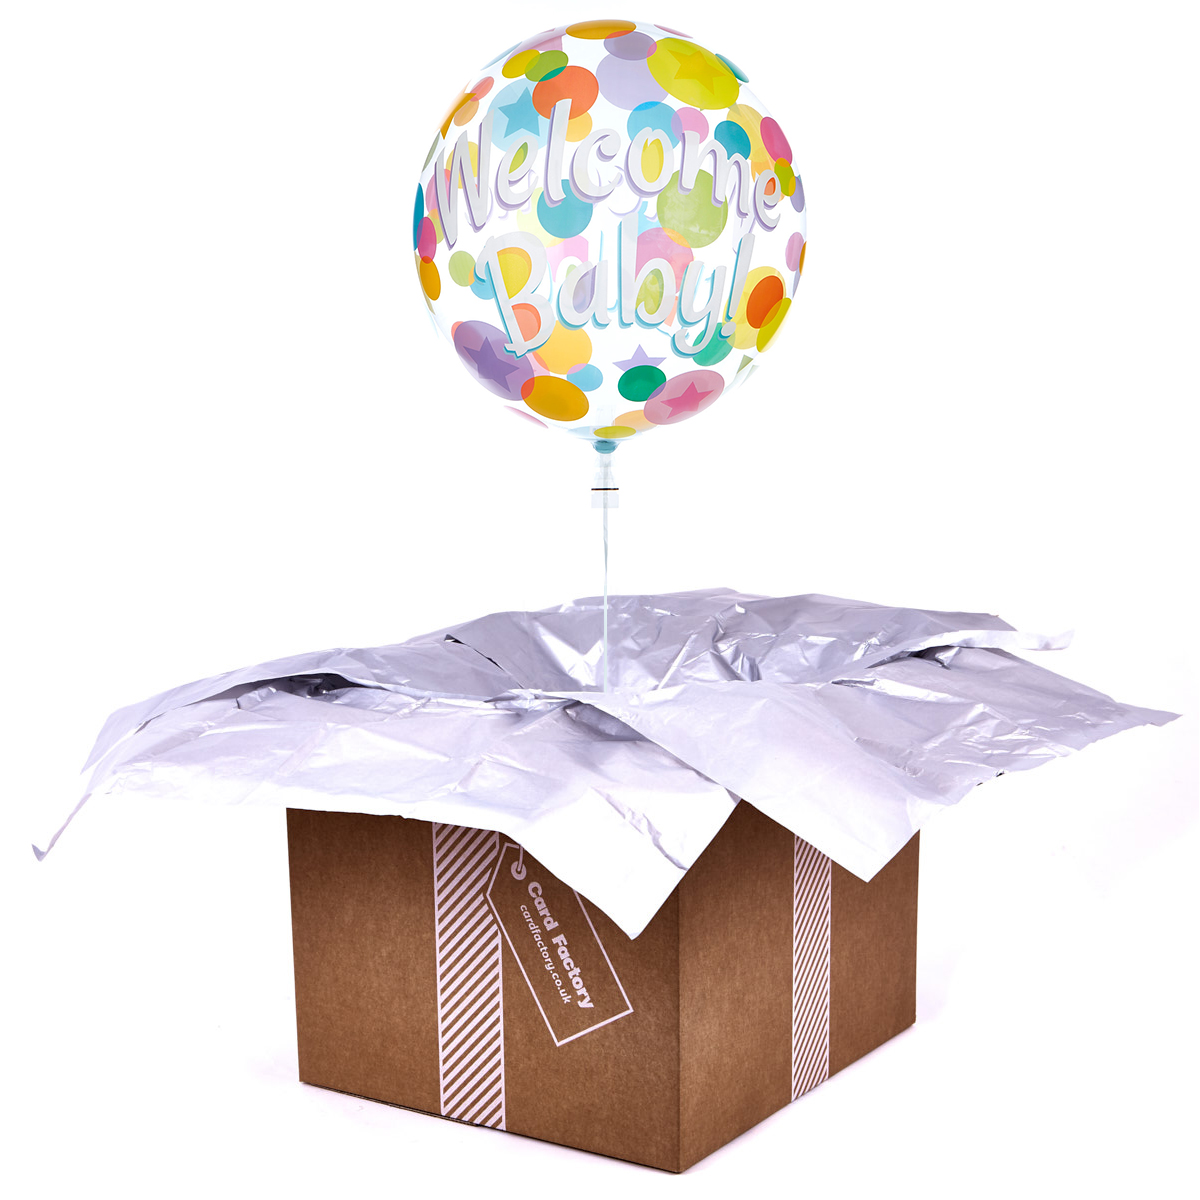 22-Inch Bubble Balloon - Welcome Baby - DELIVERED INFLATED!